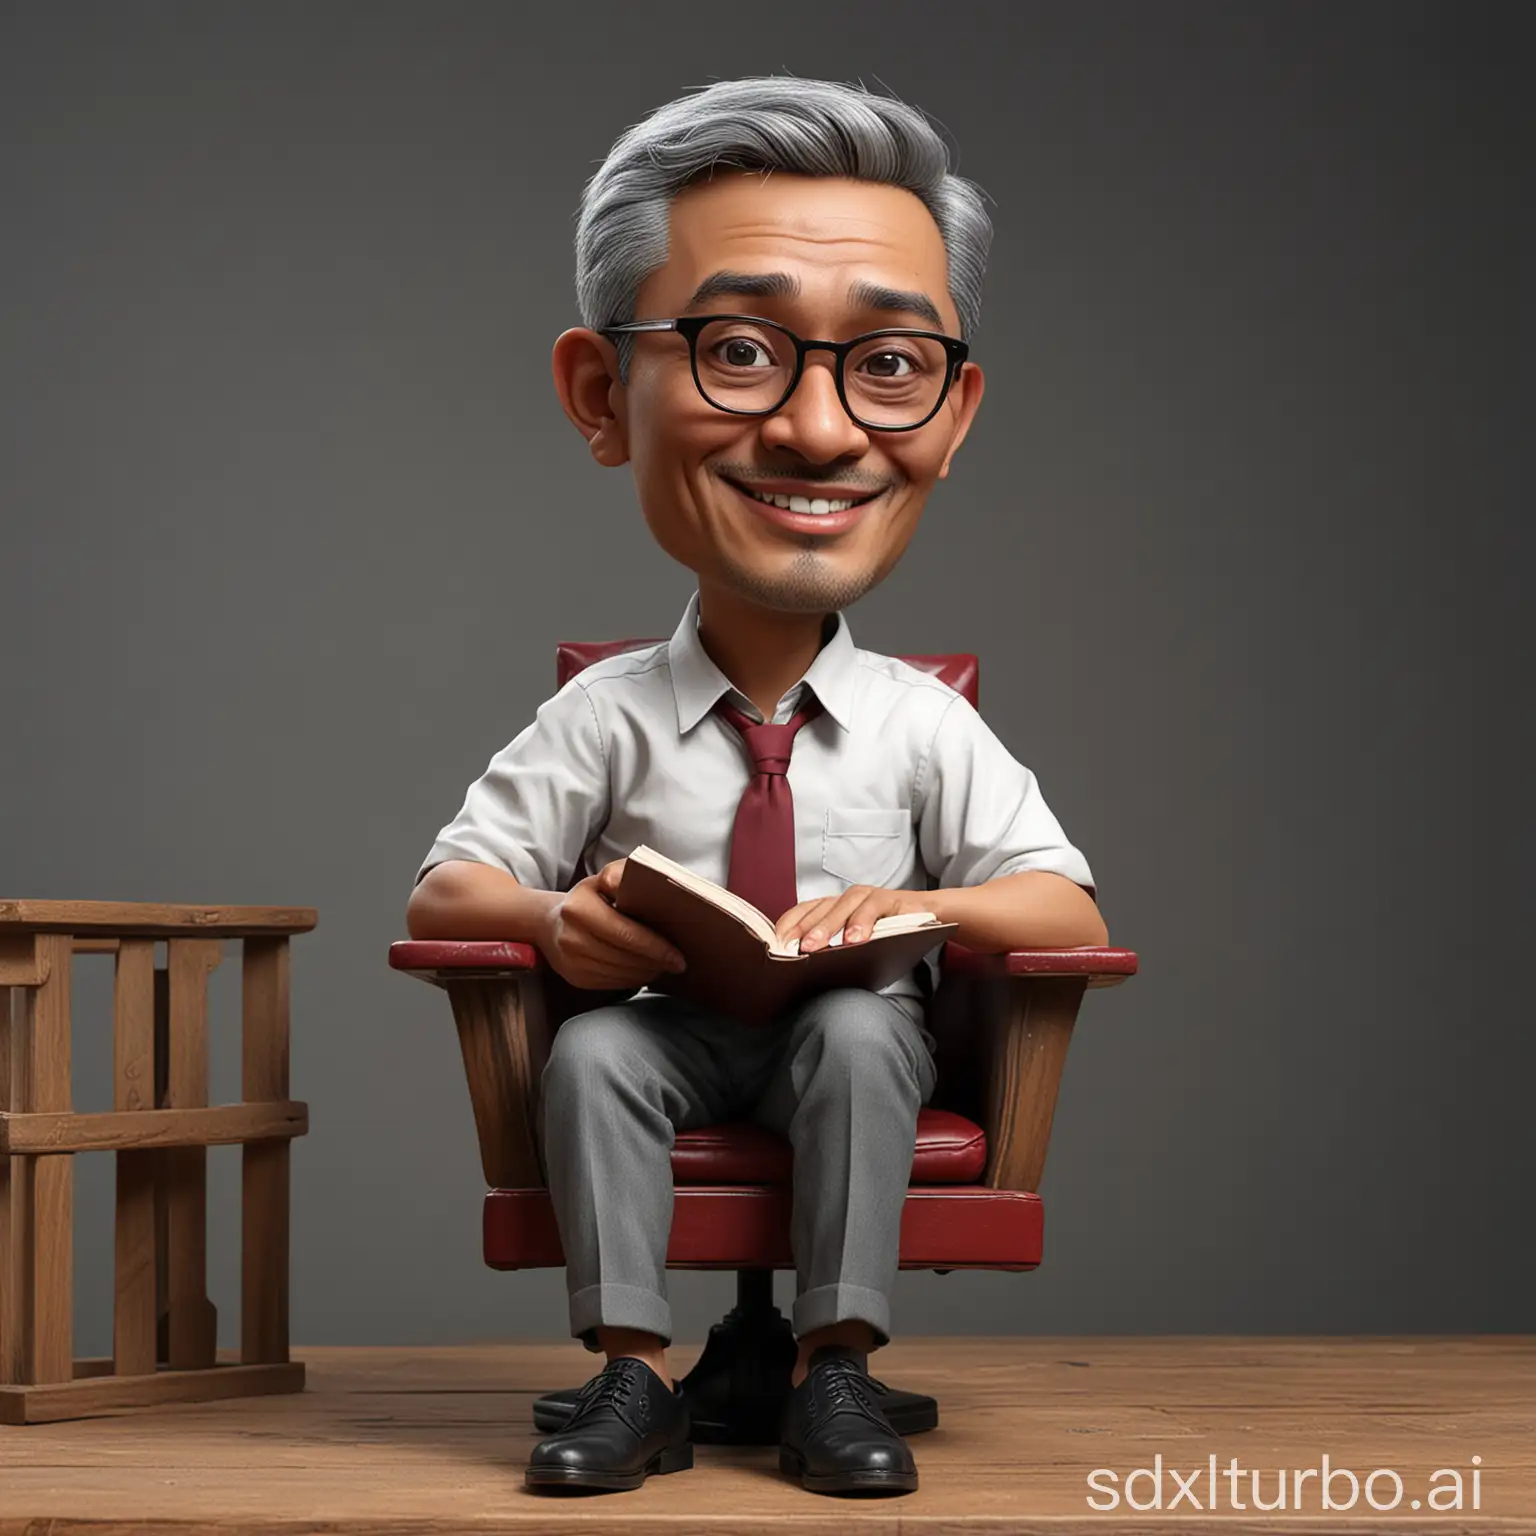 Realistic-Caricature-Portrait-of-a-Relaxed-Indonesian-Man-in-White-TShirt-and-Glasses